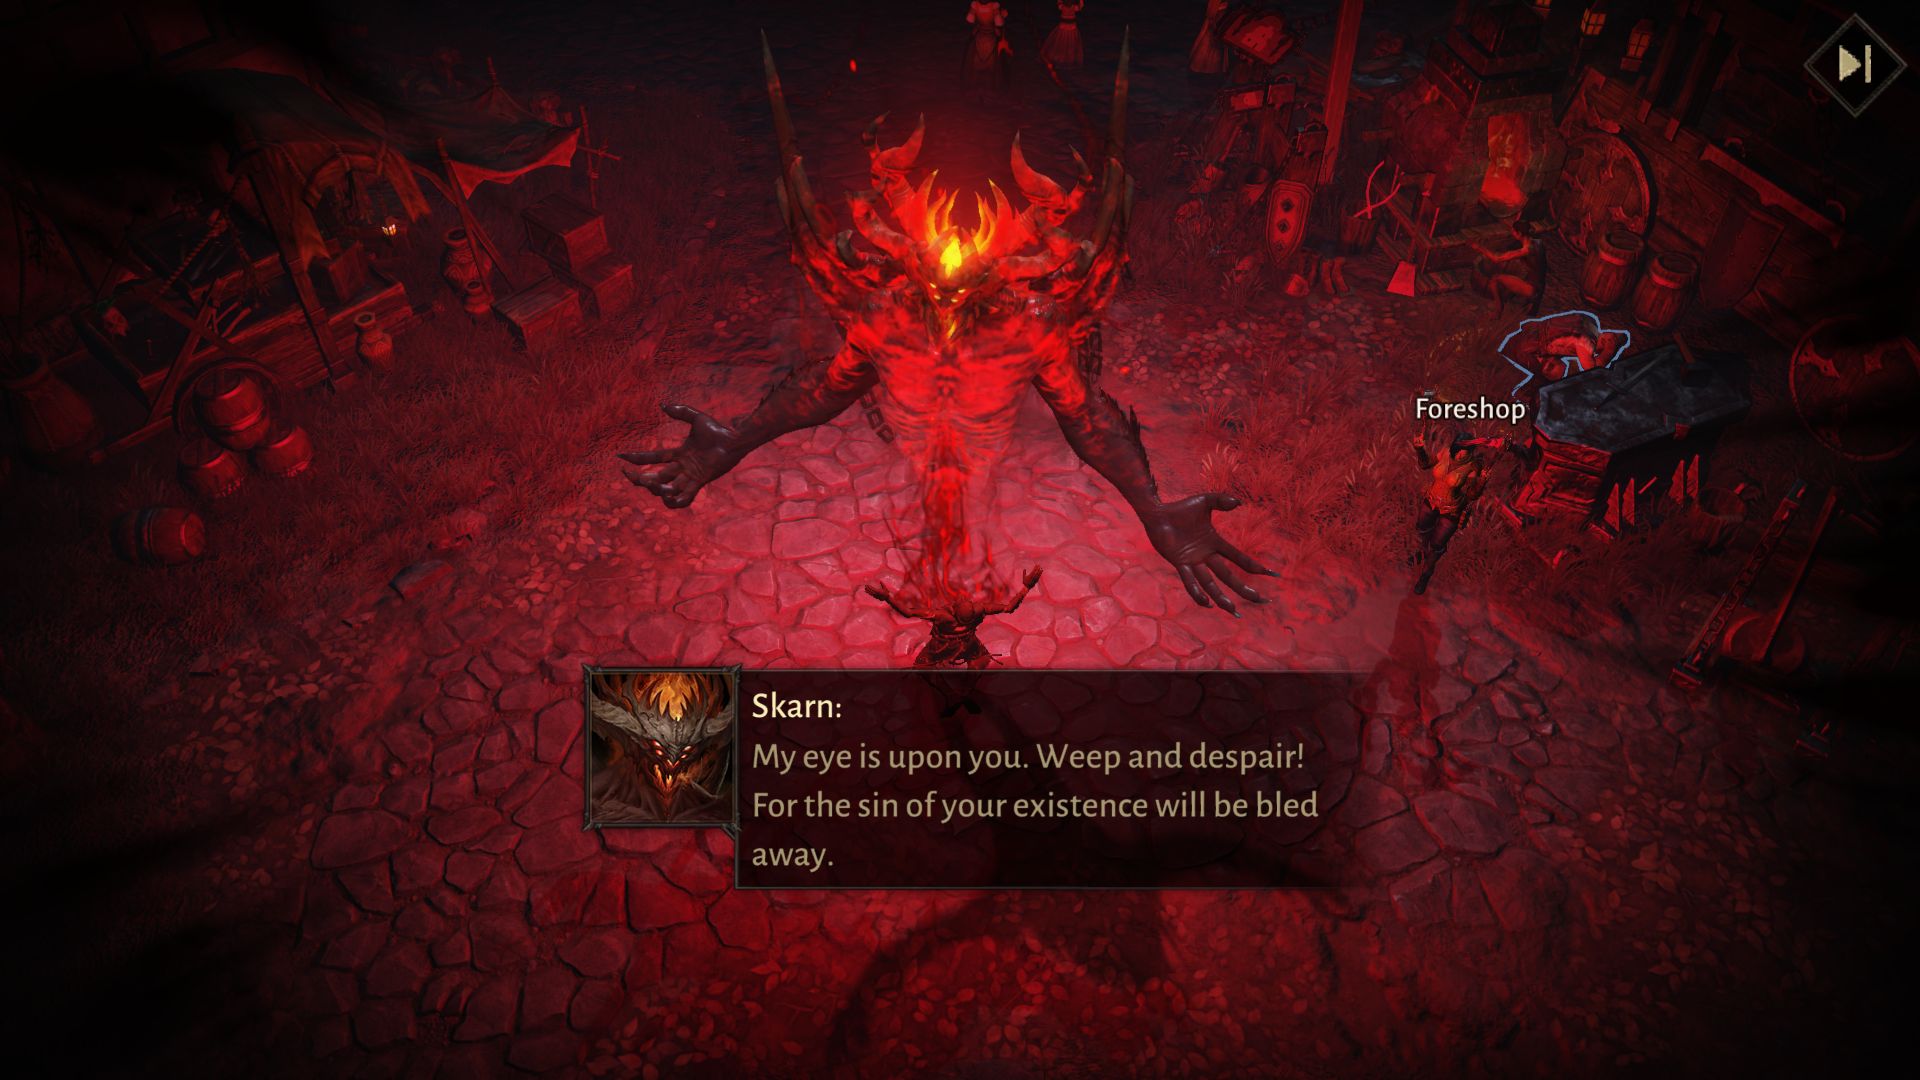 A boss called Skarn in Diablo Immortal; a big red demon in the centre of the screen projected from a dead body, saying 'My eye is upon you. Weep and despair! For the sin of your existence will be bled away.'